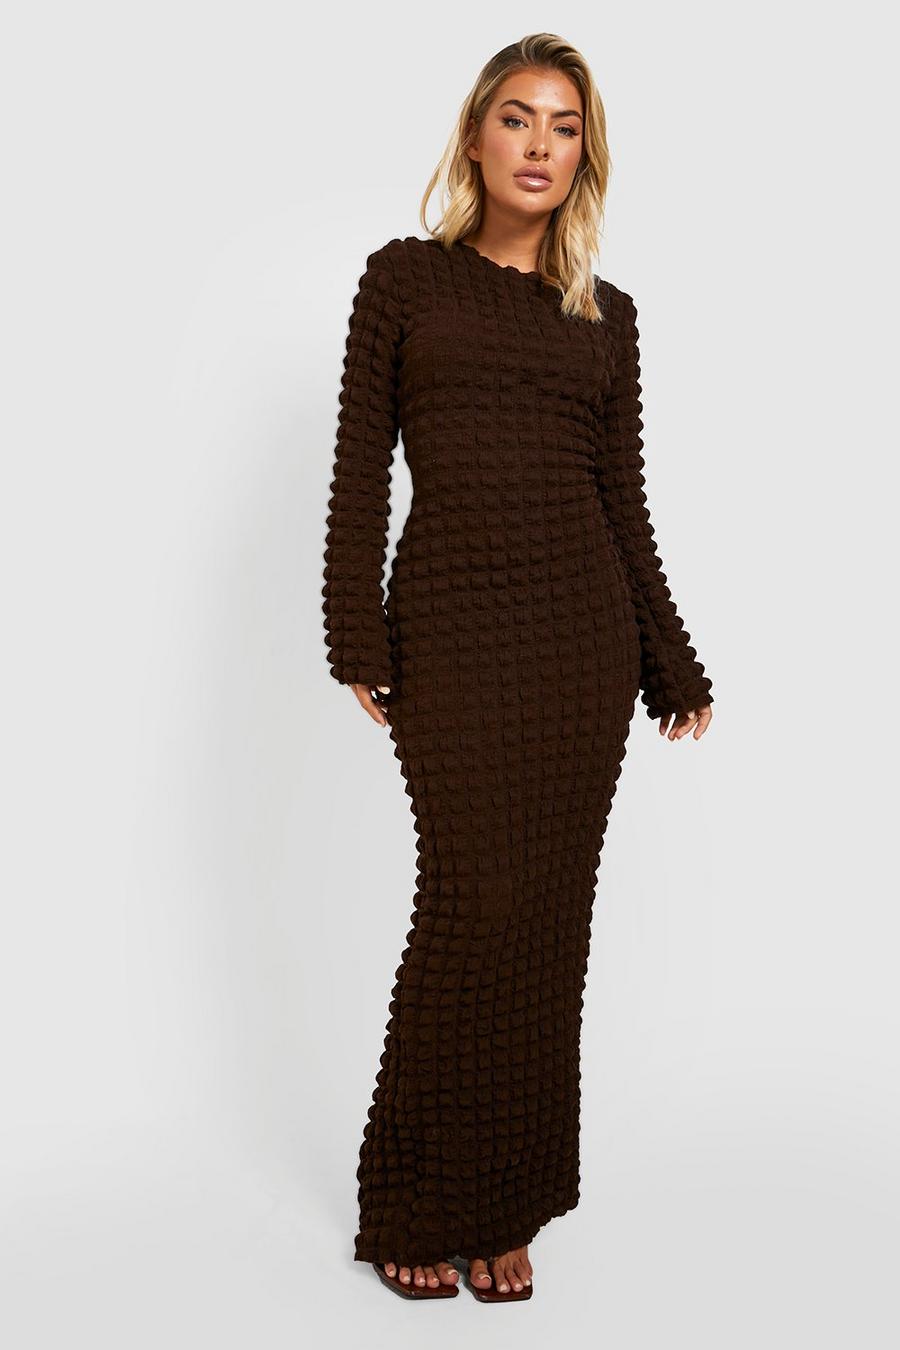 Chocolate brown Bubble Textured Maxi Dress